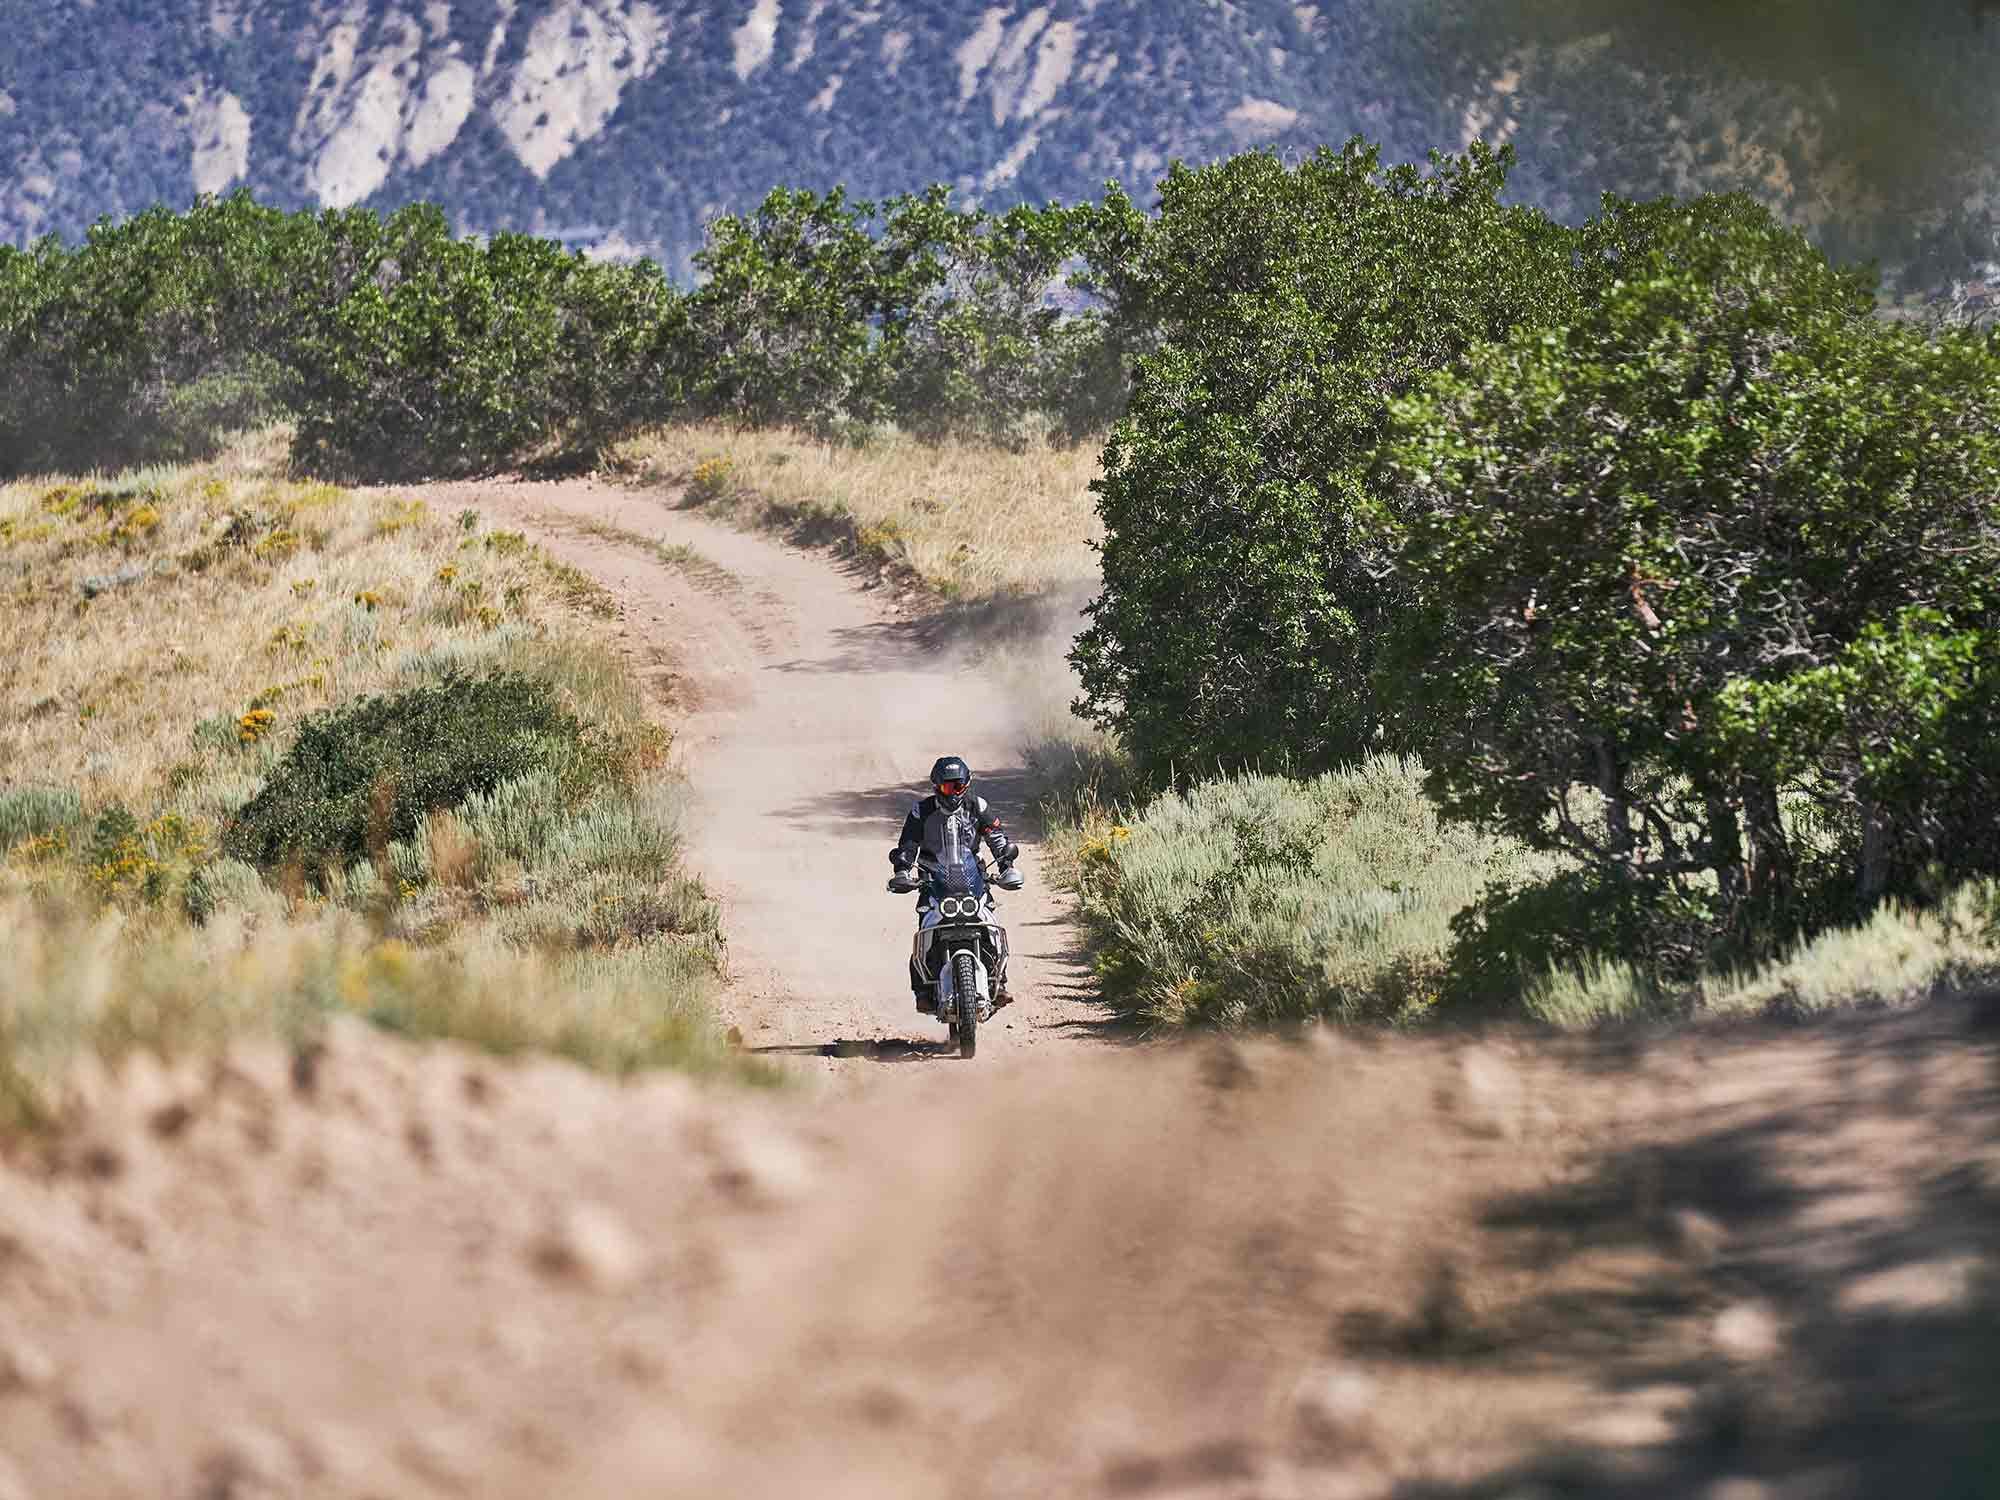 As equipped, our bikes were set up for any kind of dirt riding you can throw at it, but if that isn’t your thing, there are other packages that optimize it for touring, sport riding, or even urban environments.